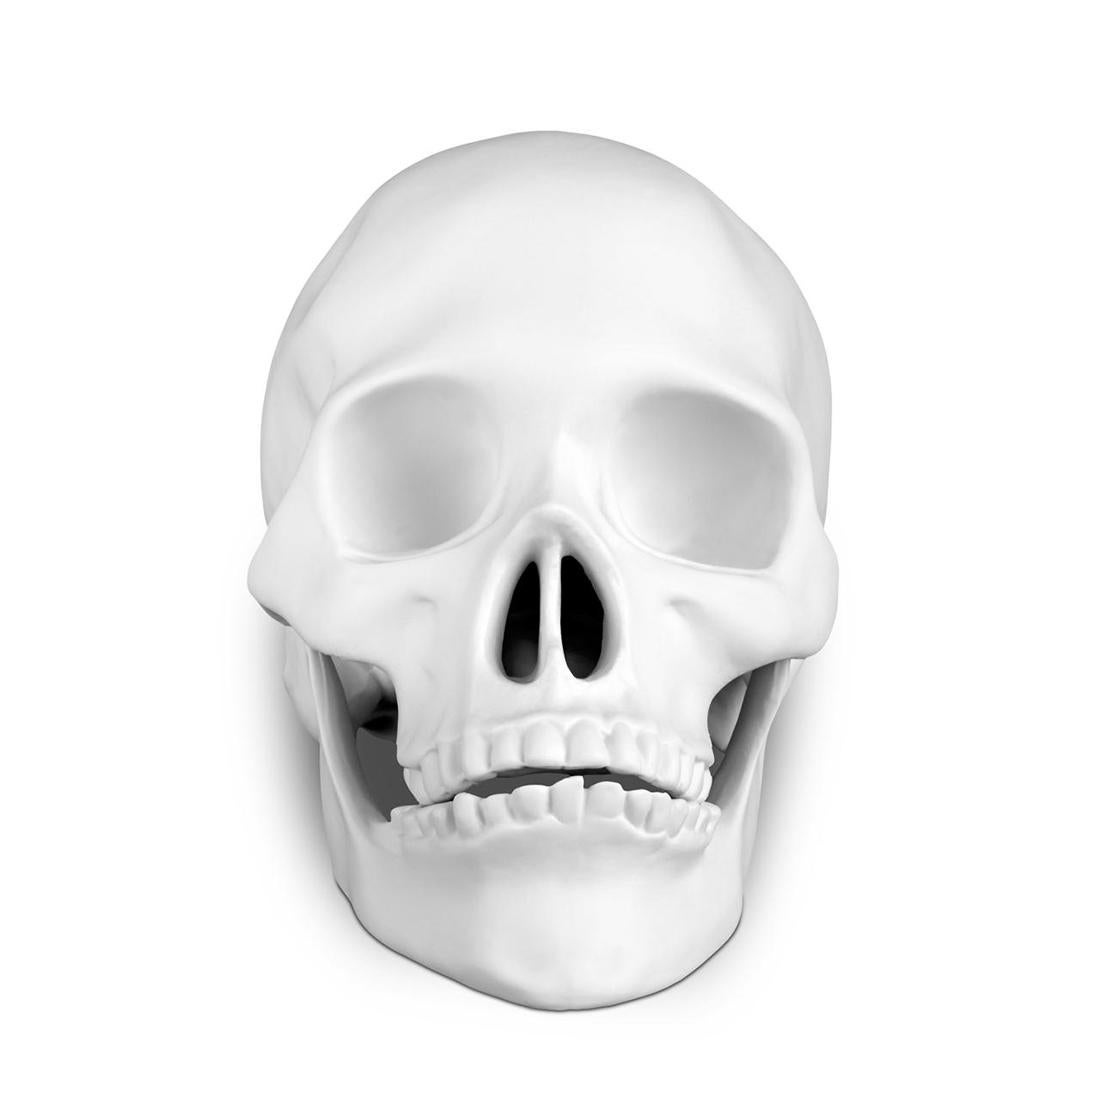 Sculpture skull white in Limoges porcelain
and in white finish.
Also available in black finish.